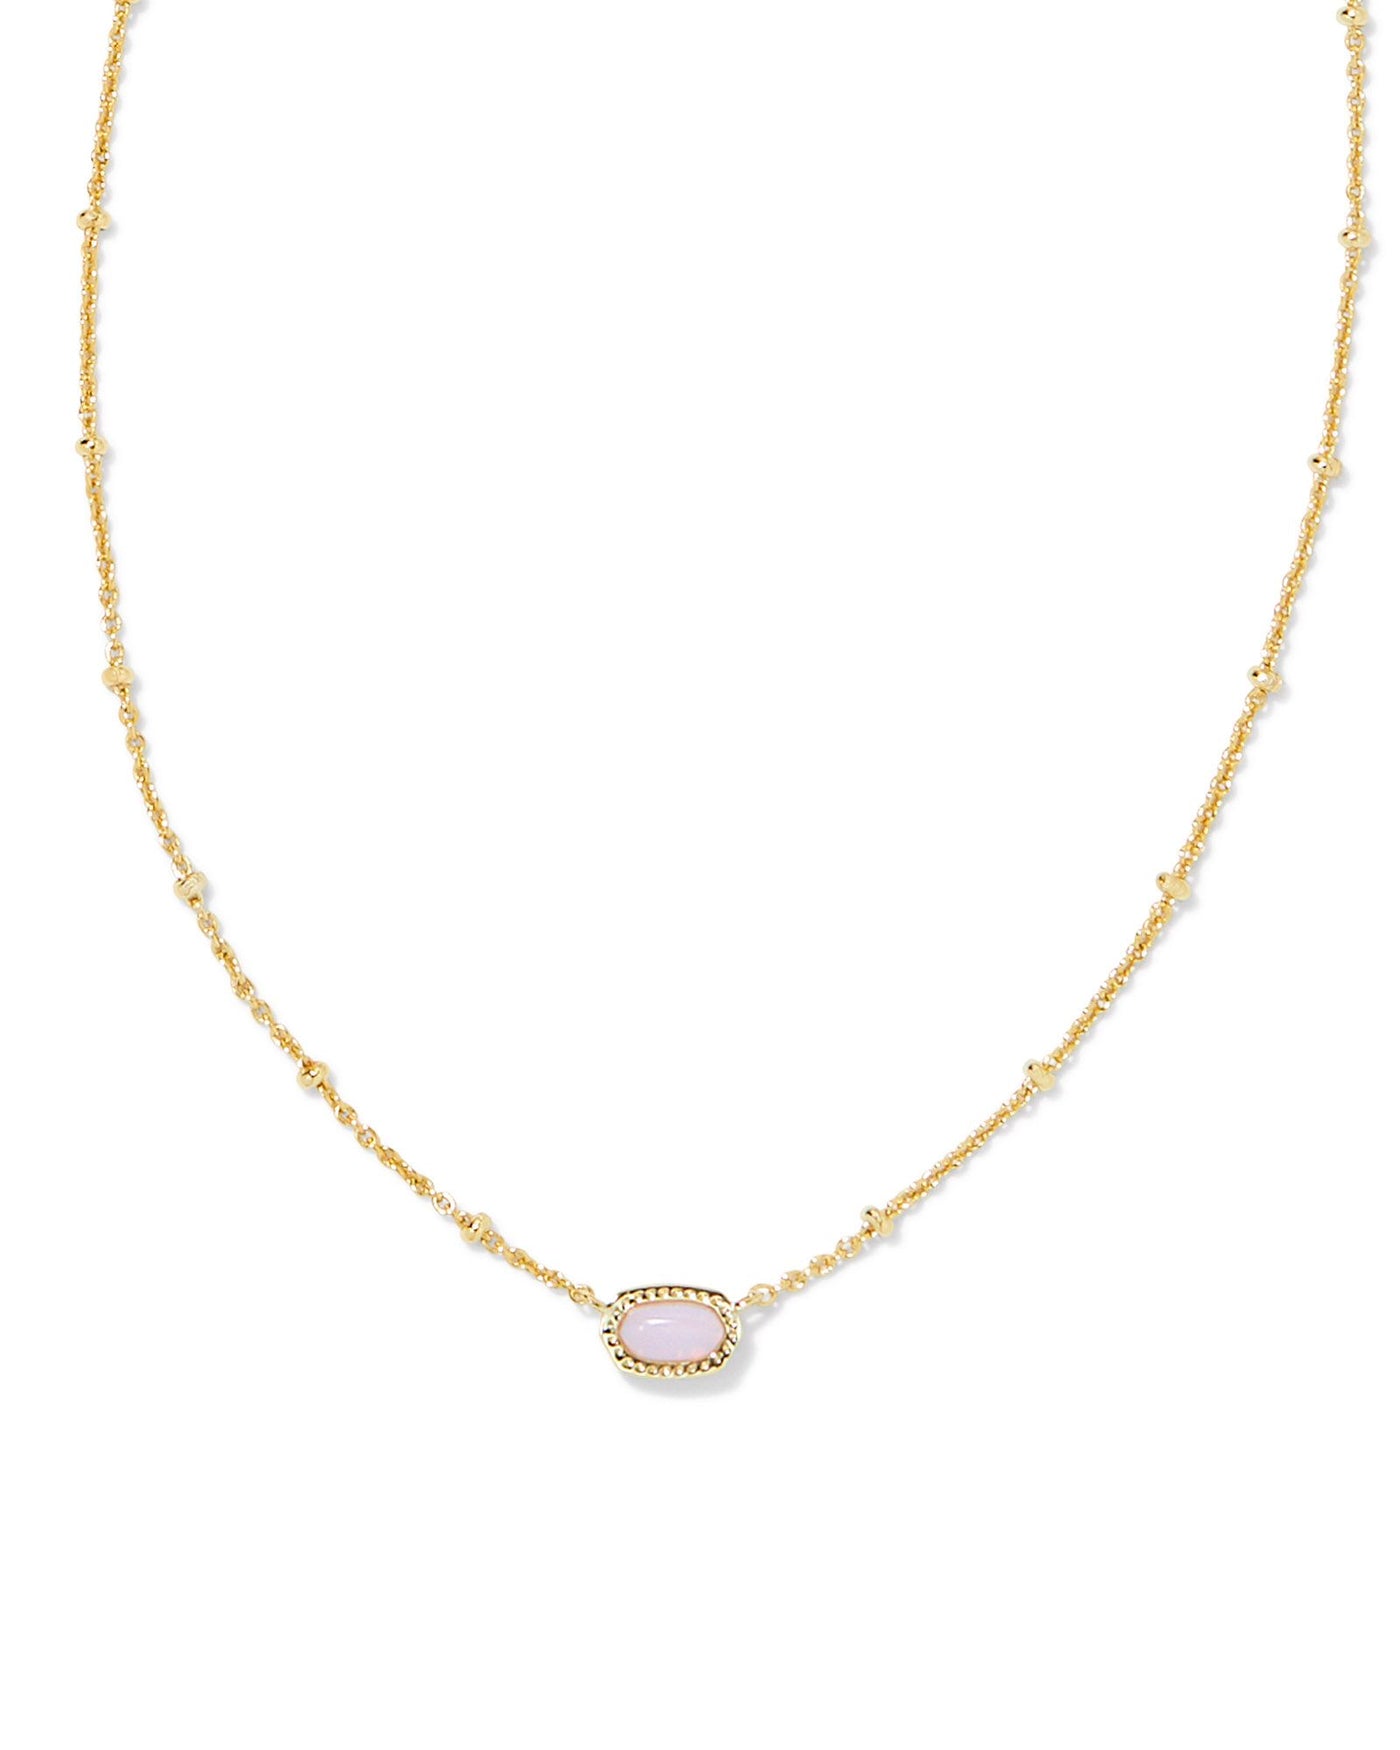 Kendra Scott Mini Elisa Satellite Necklace in Gold Pink Opalite Crystal close up.